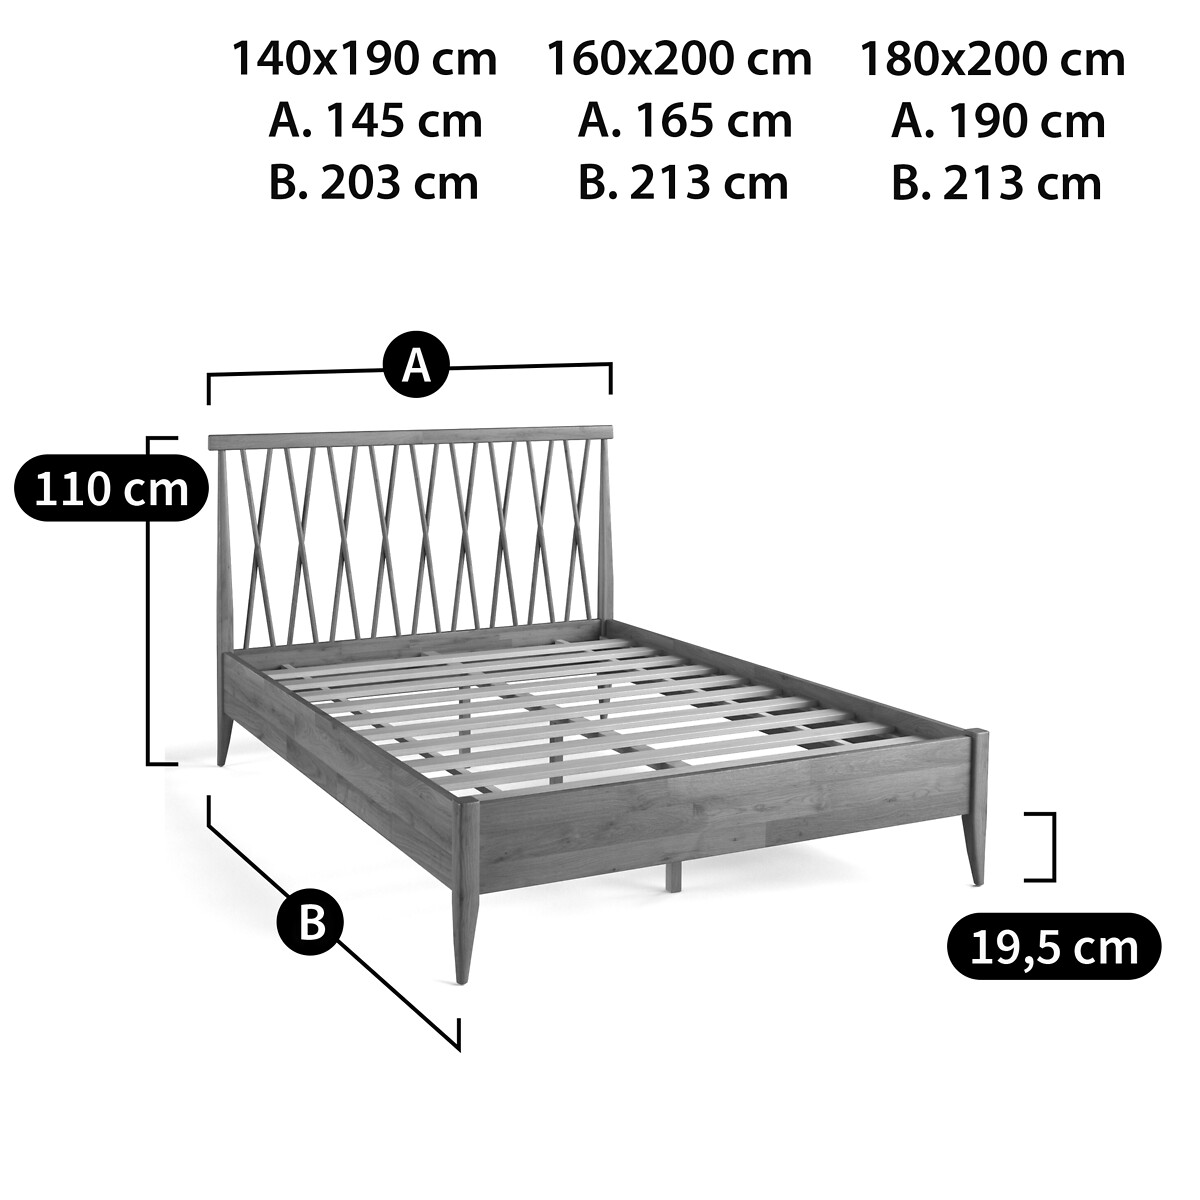 Quilda Soild Oak Bed Wood La Redoute, What Is The Standard Size Of Double Bed In India